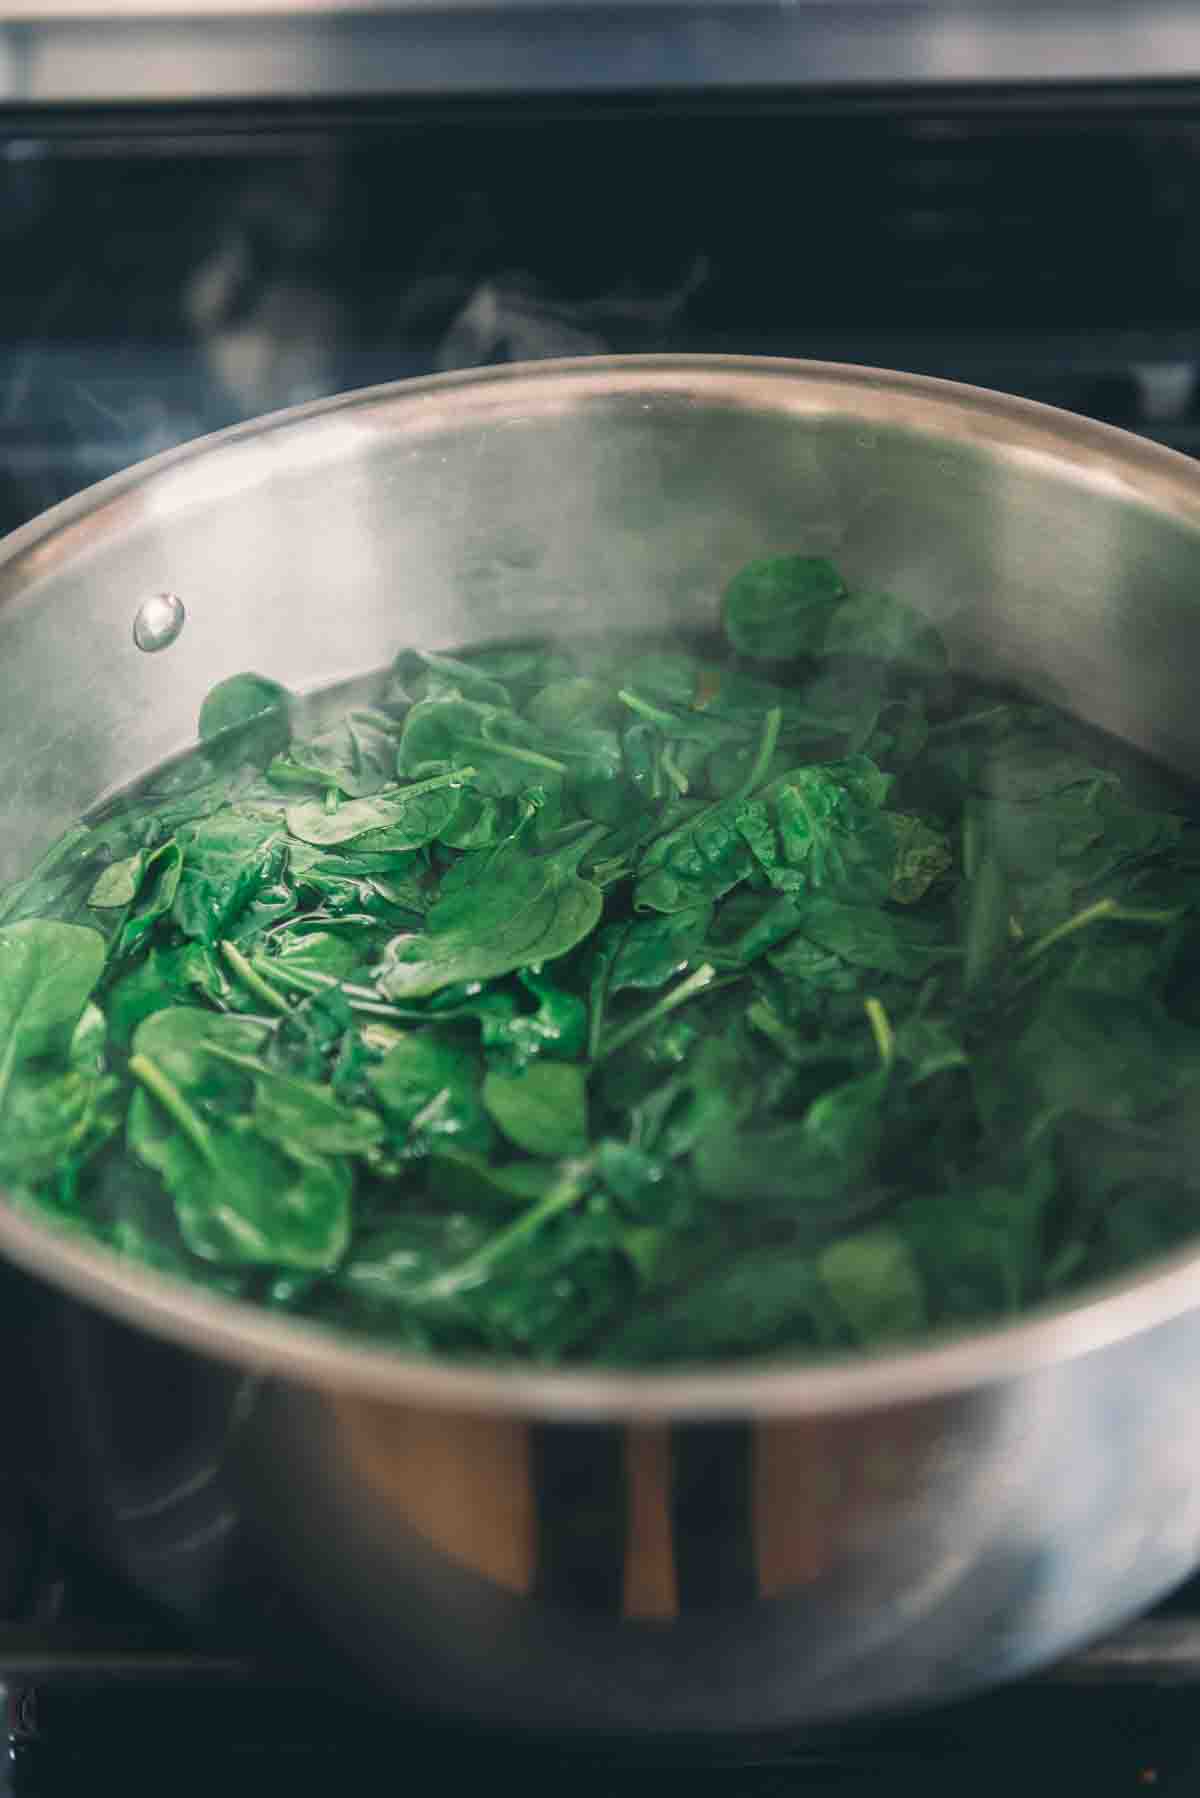 Spinach being blanched in a pot of hot water.